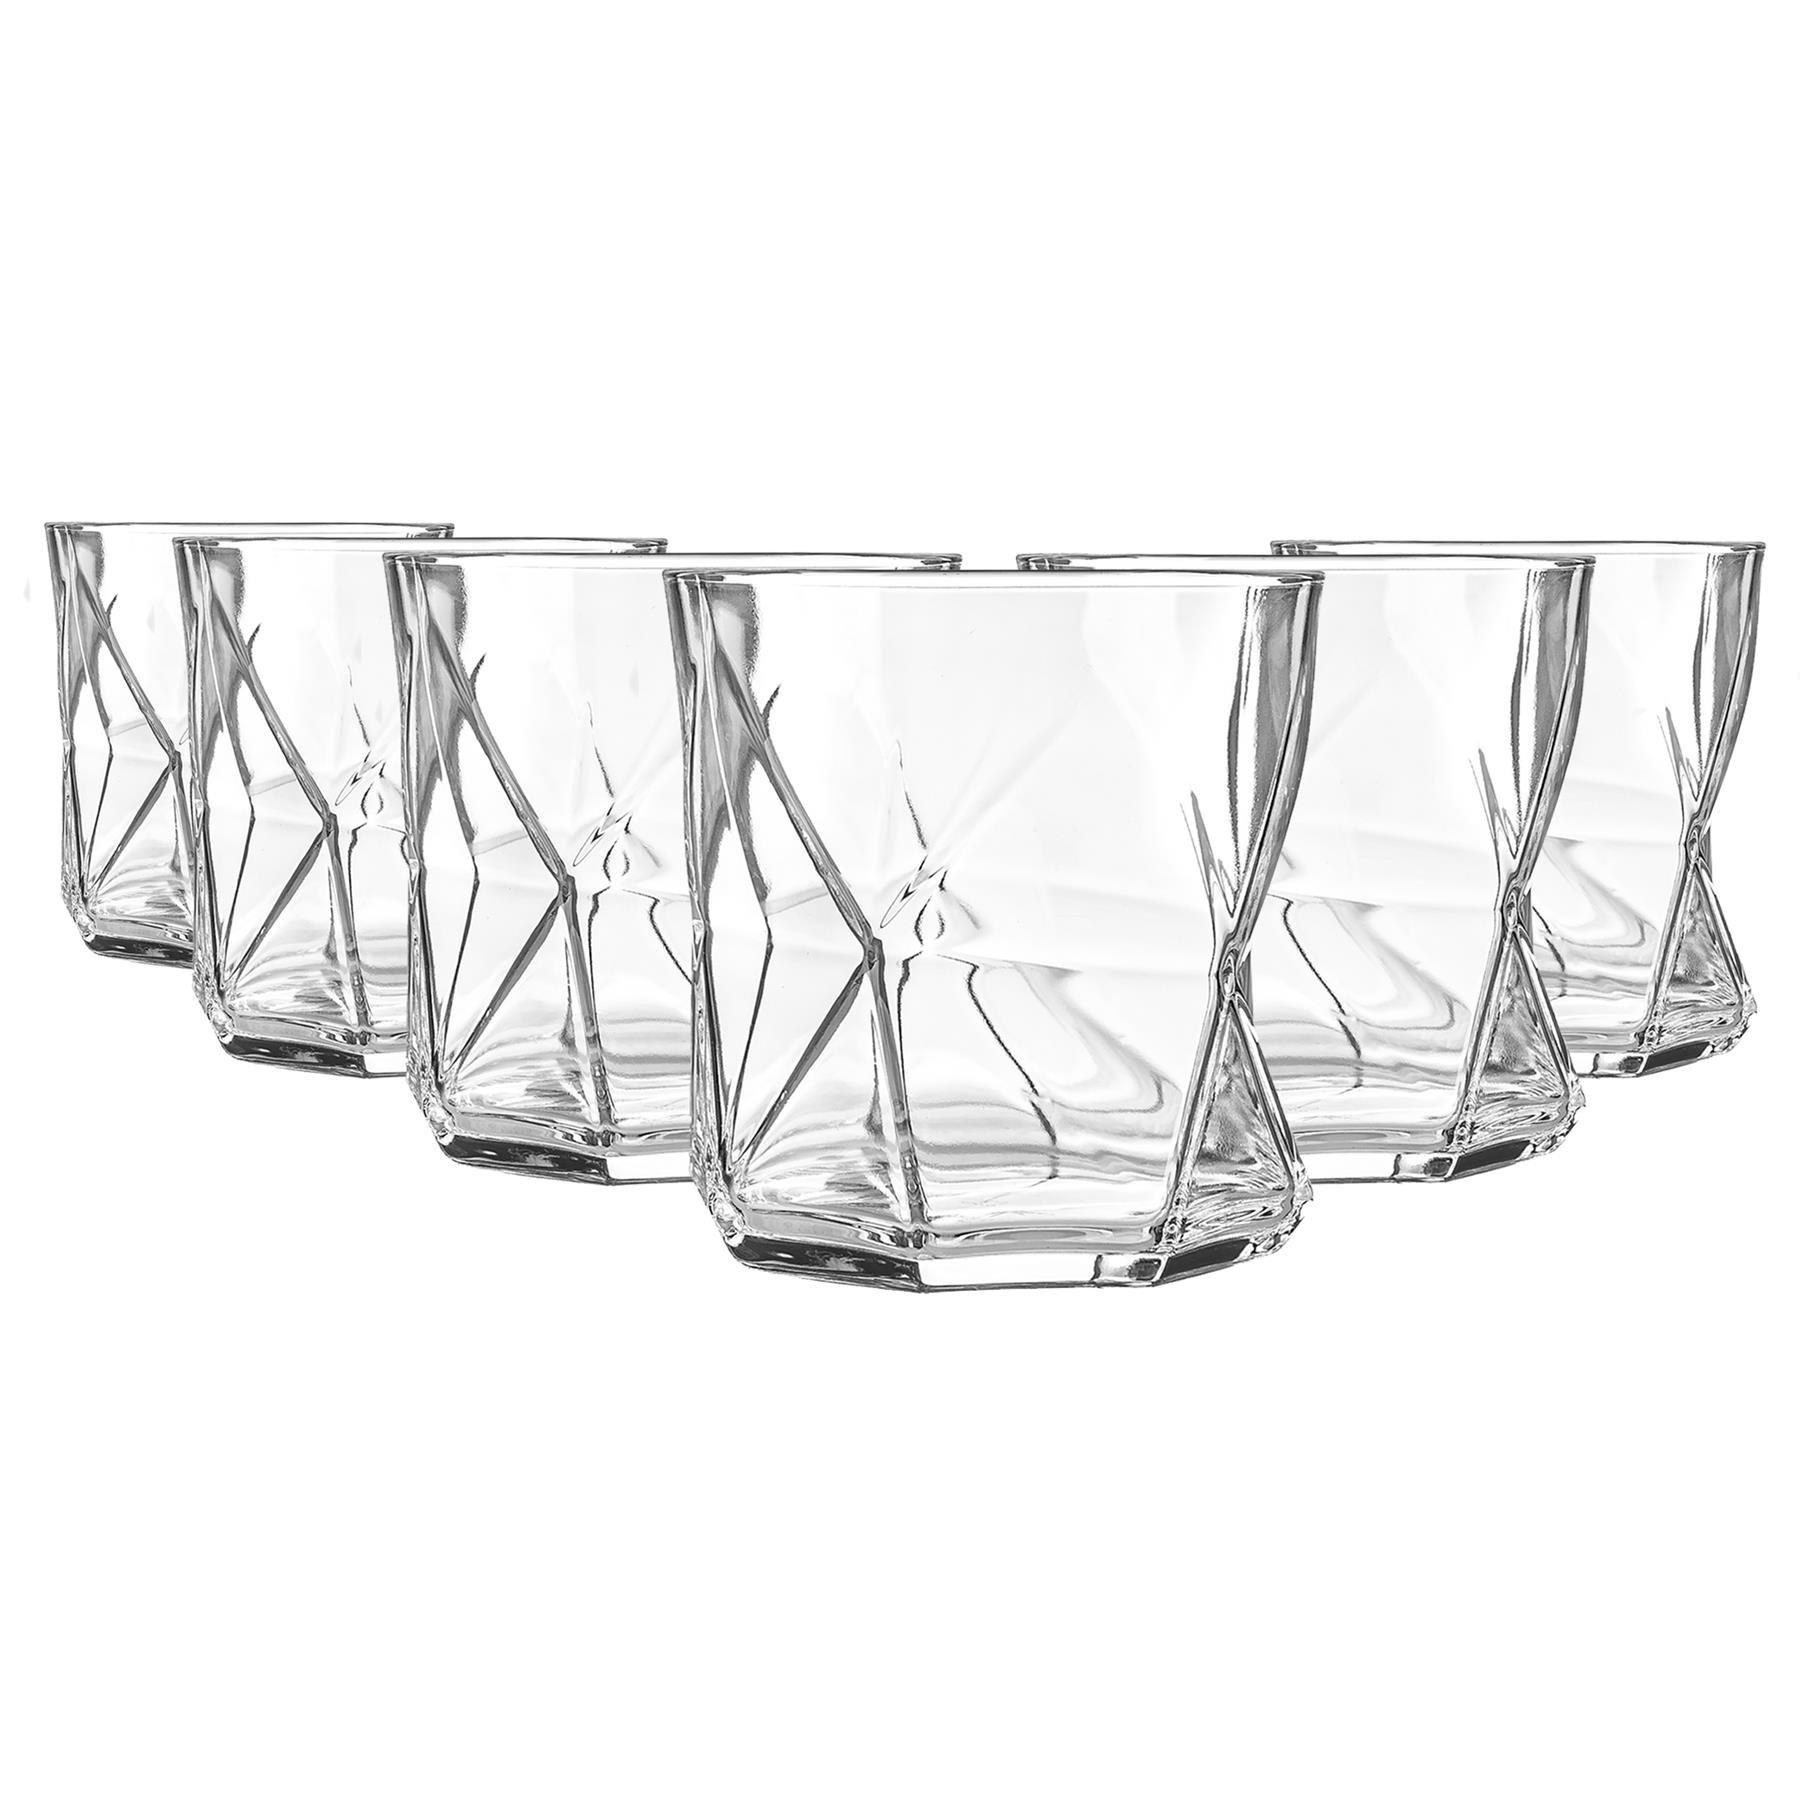 Photos - Glass Bormioli Rocco Cassiopea Whisky Glasses - 330ml - Clear - Pack of 24 